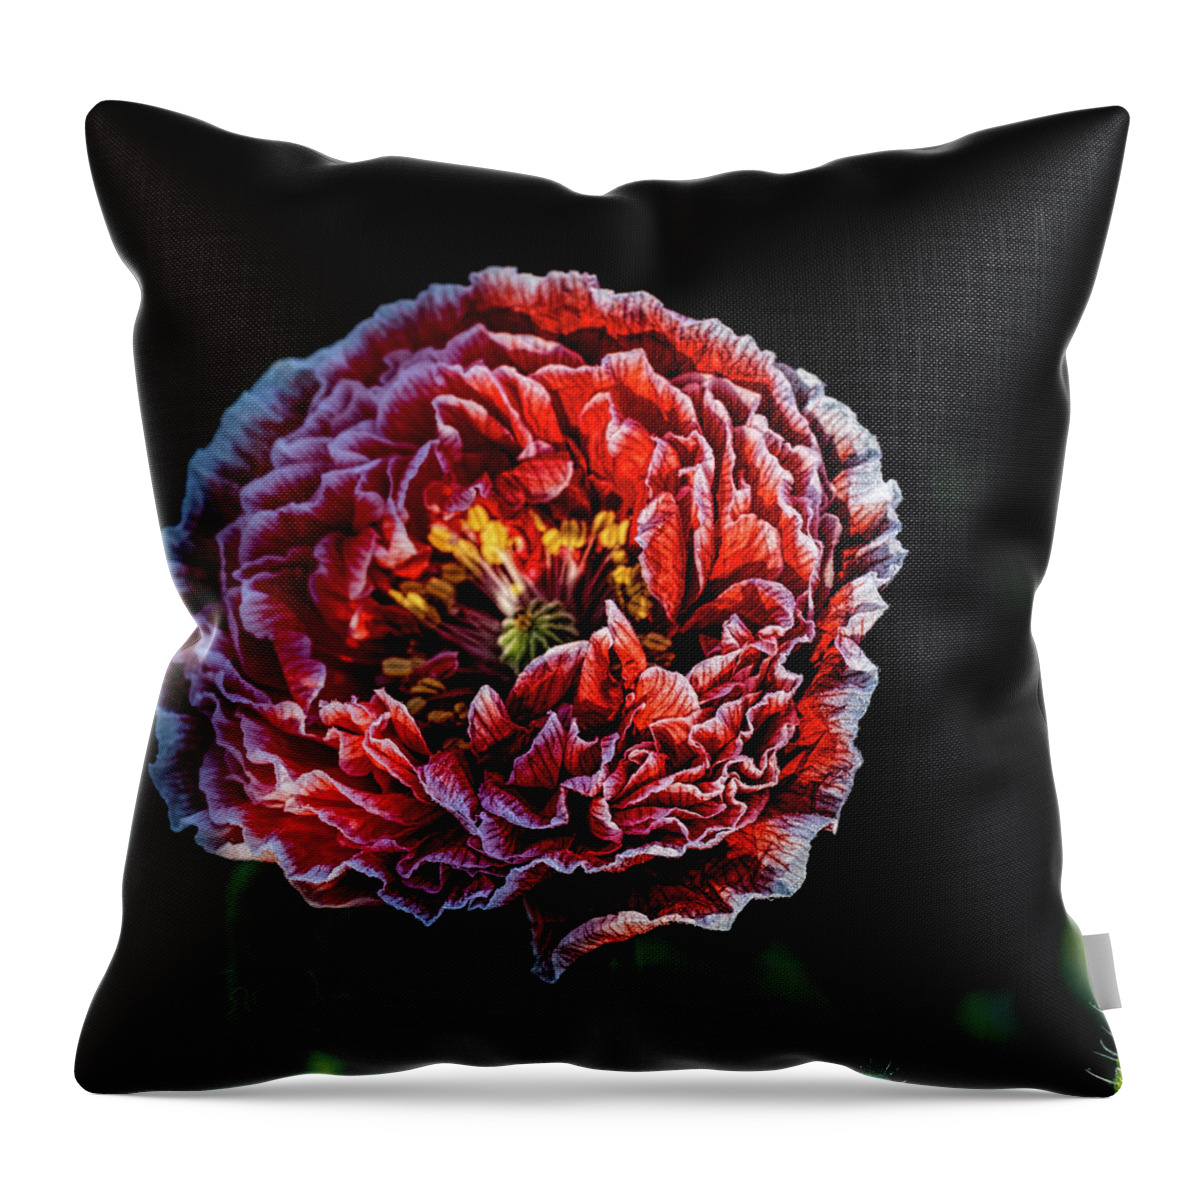 Alaska Throw Pillow featuring the photograph Poppy by Fred Denner